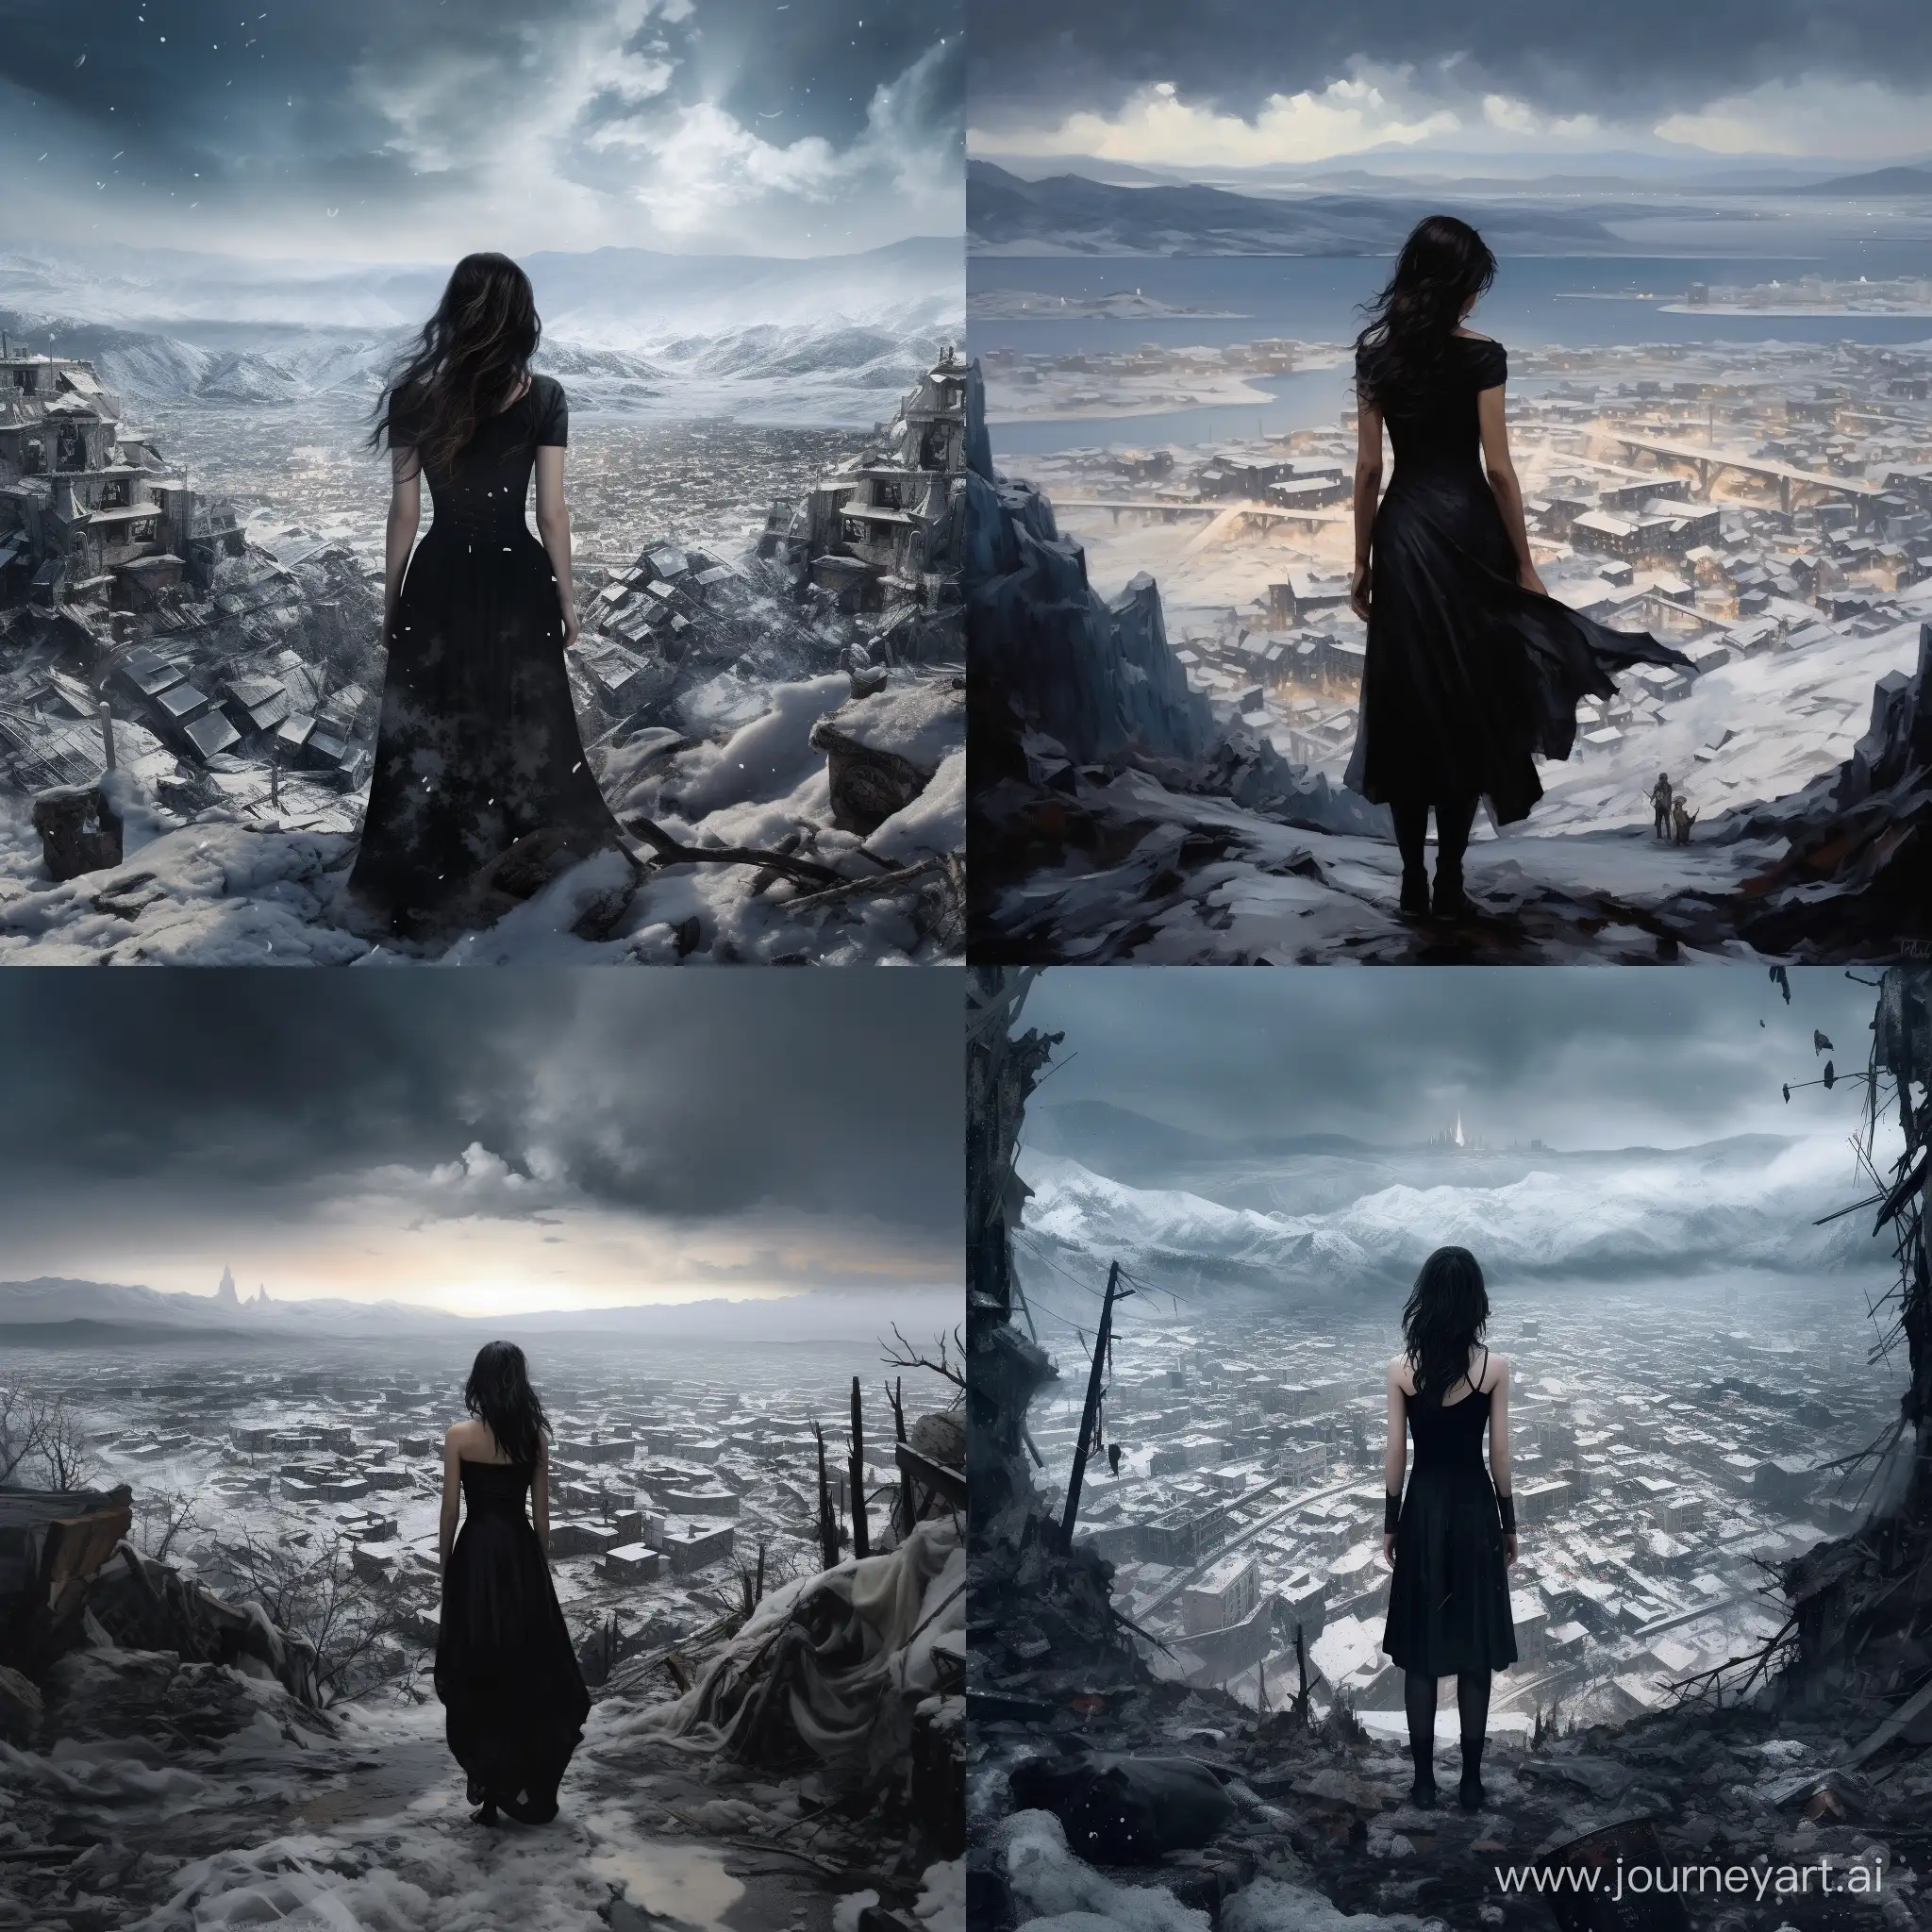 Lonely-Girl-in-Tattered-Black-Dress-Contemplates-Frozen-Apocalypse